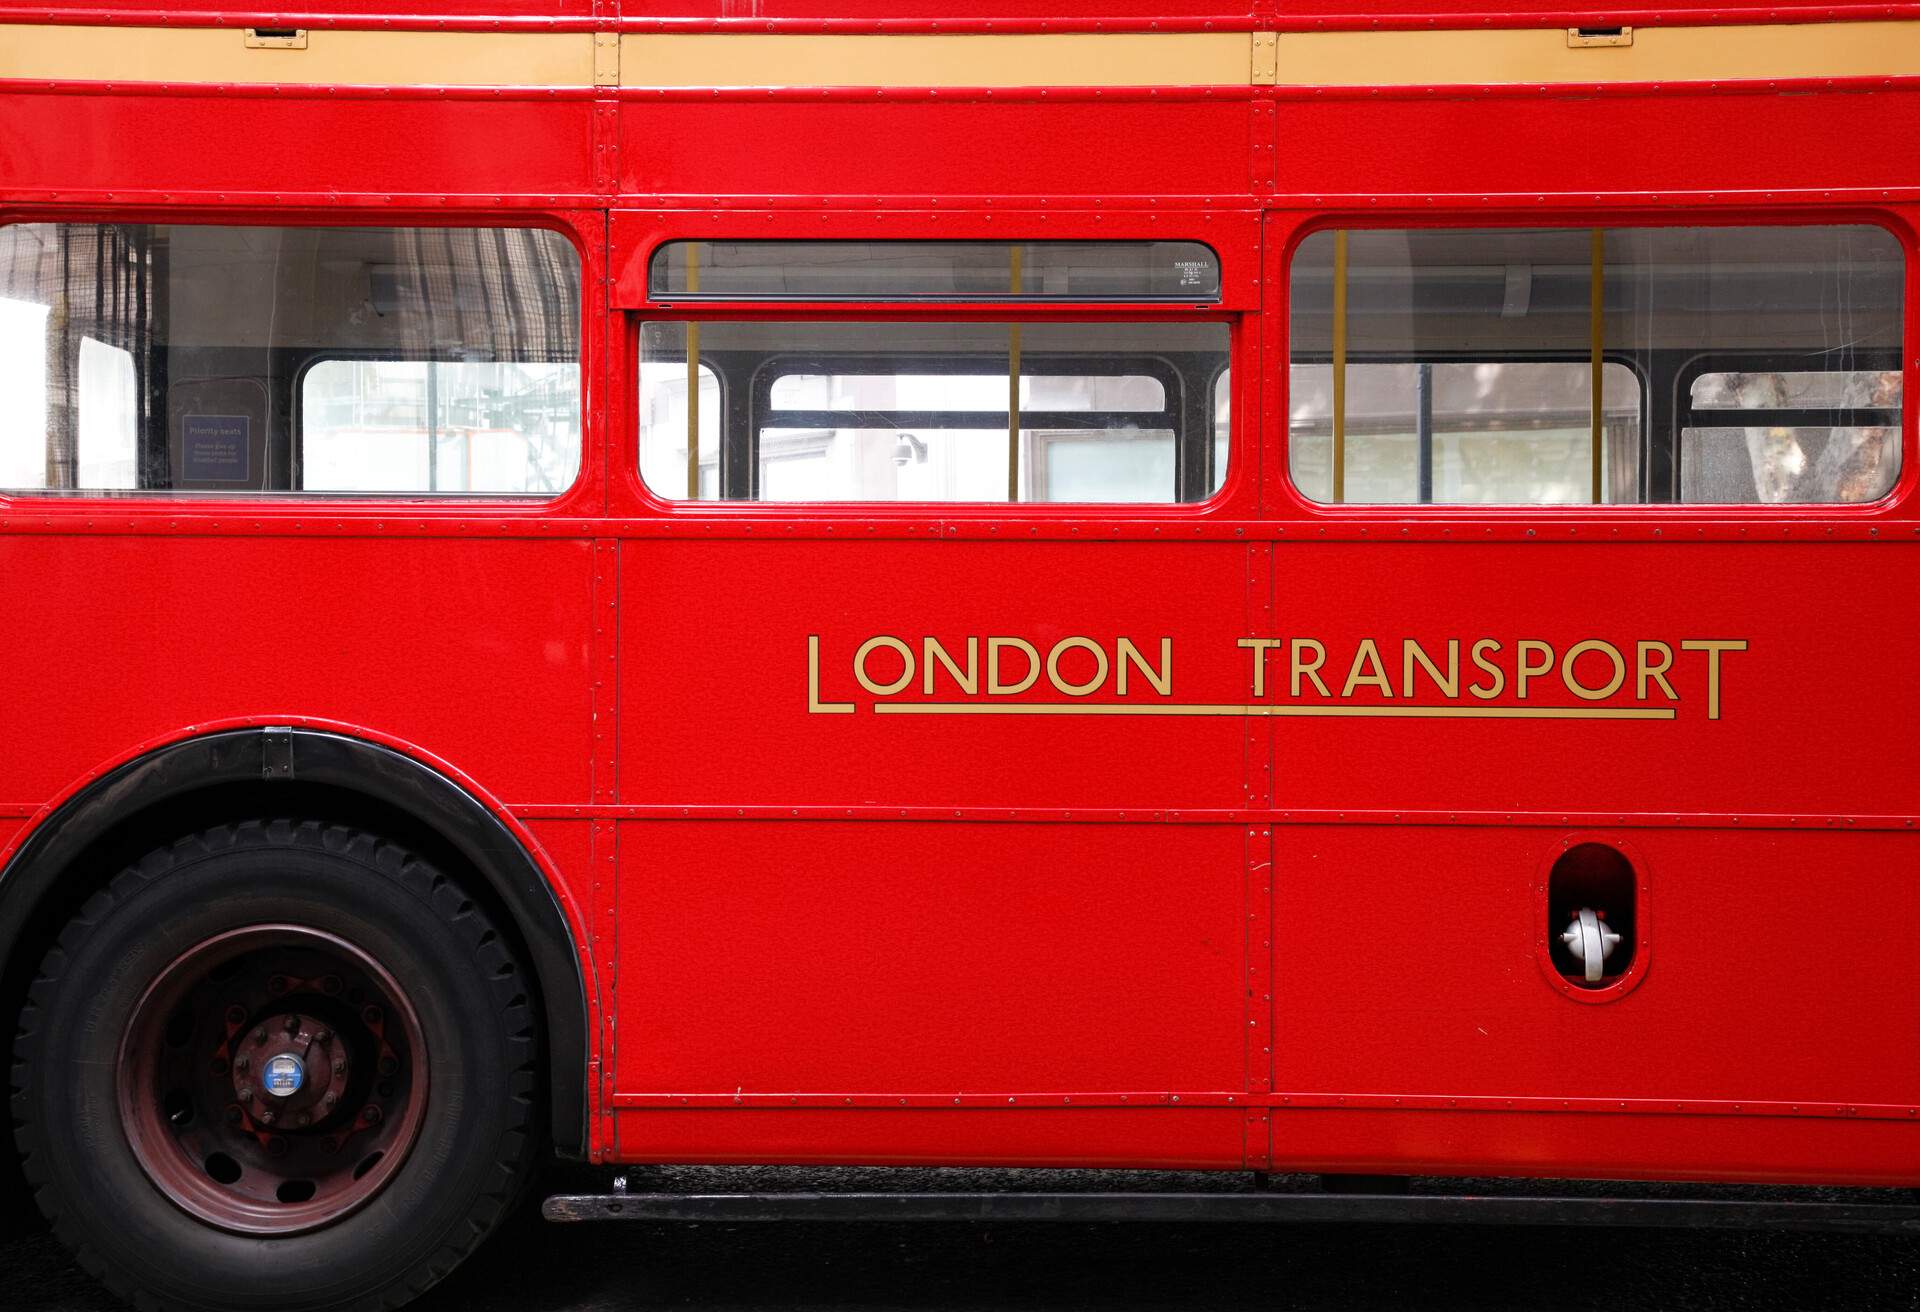 The iconic Routemaster Bus has been seen on London's streets since the mid 1950s